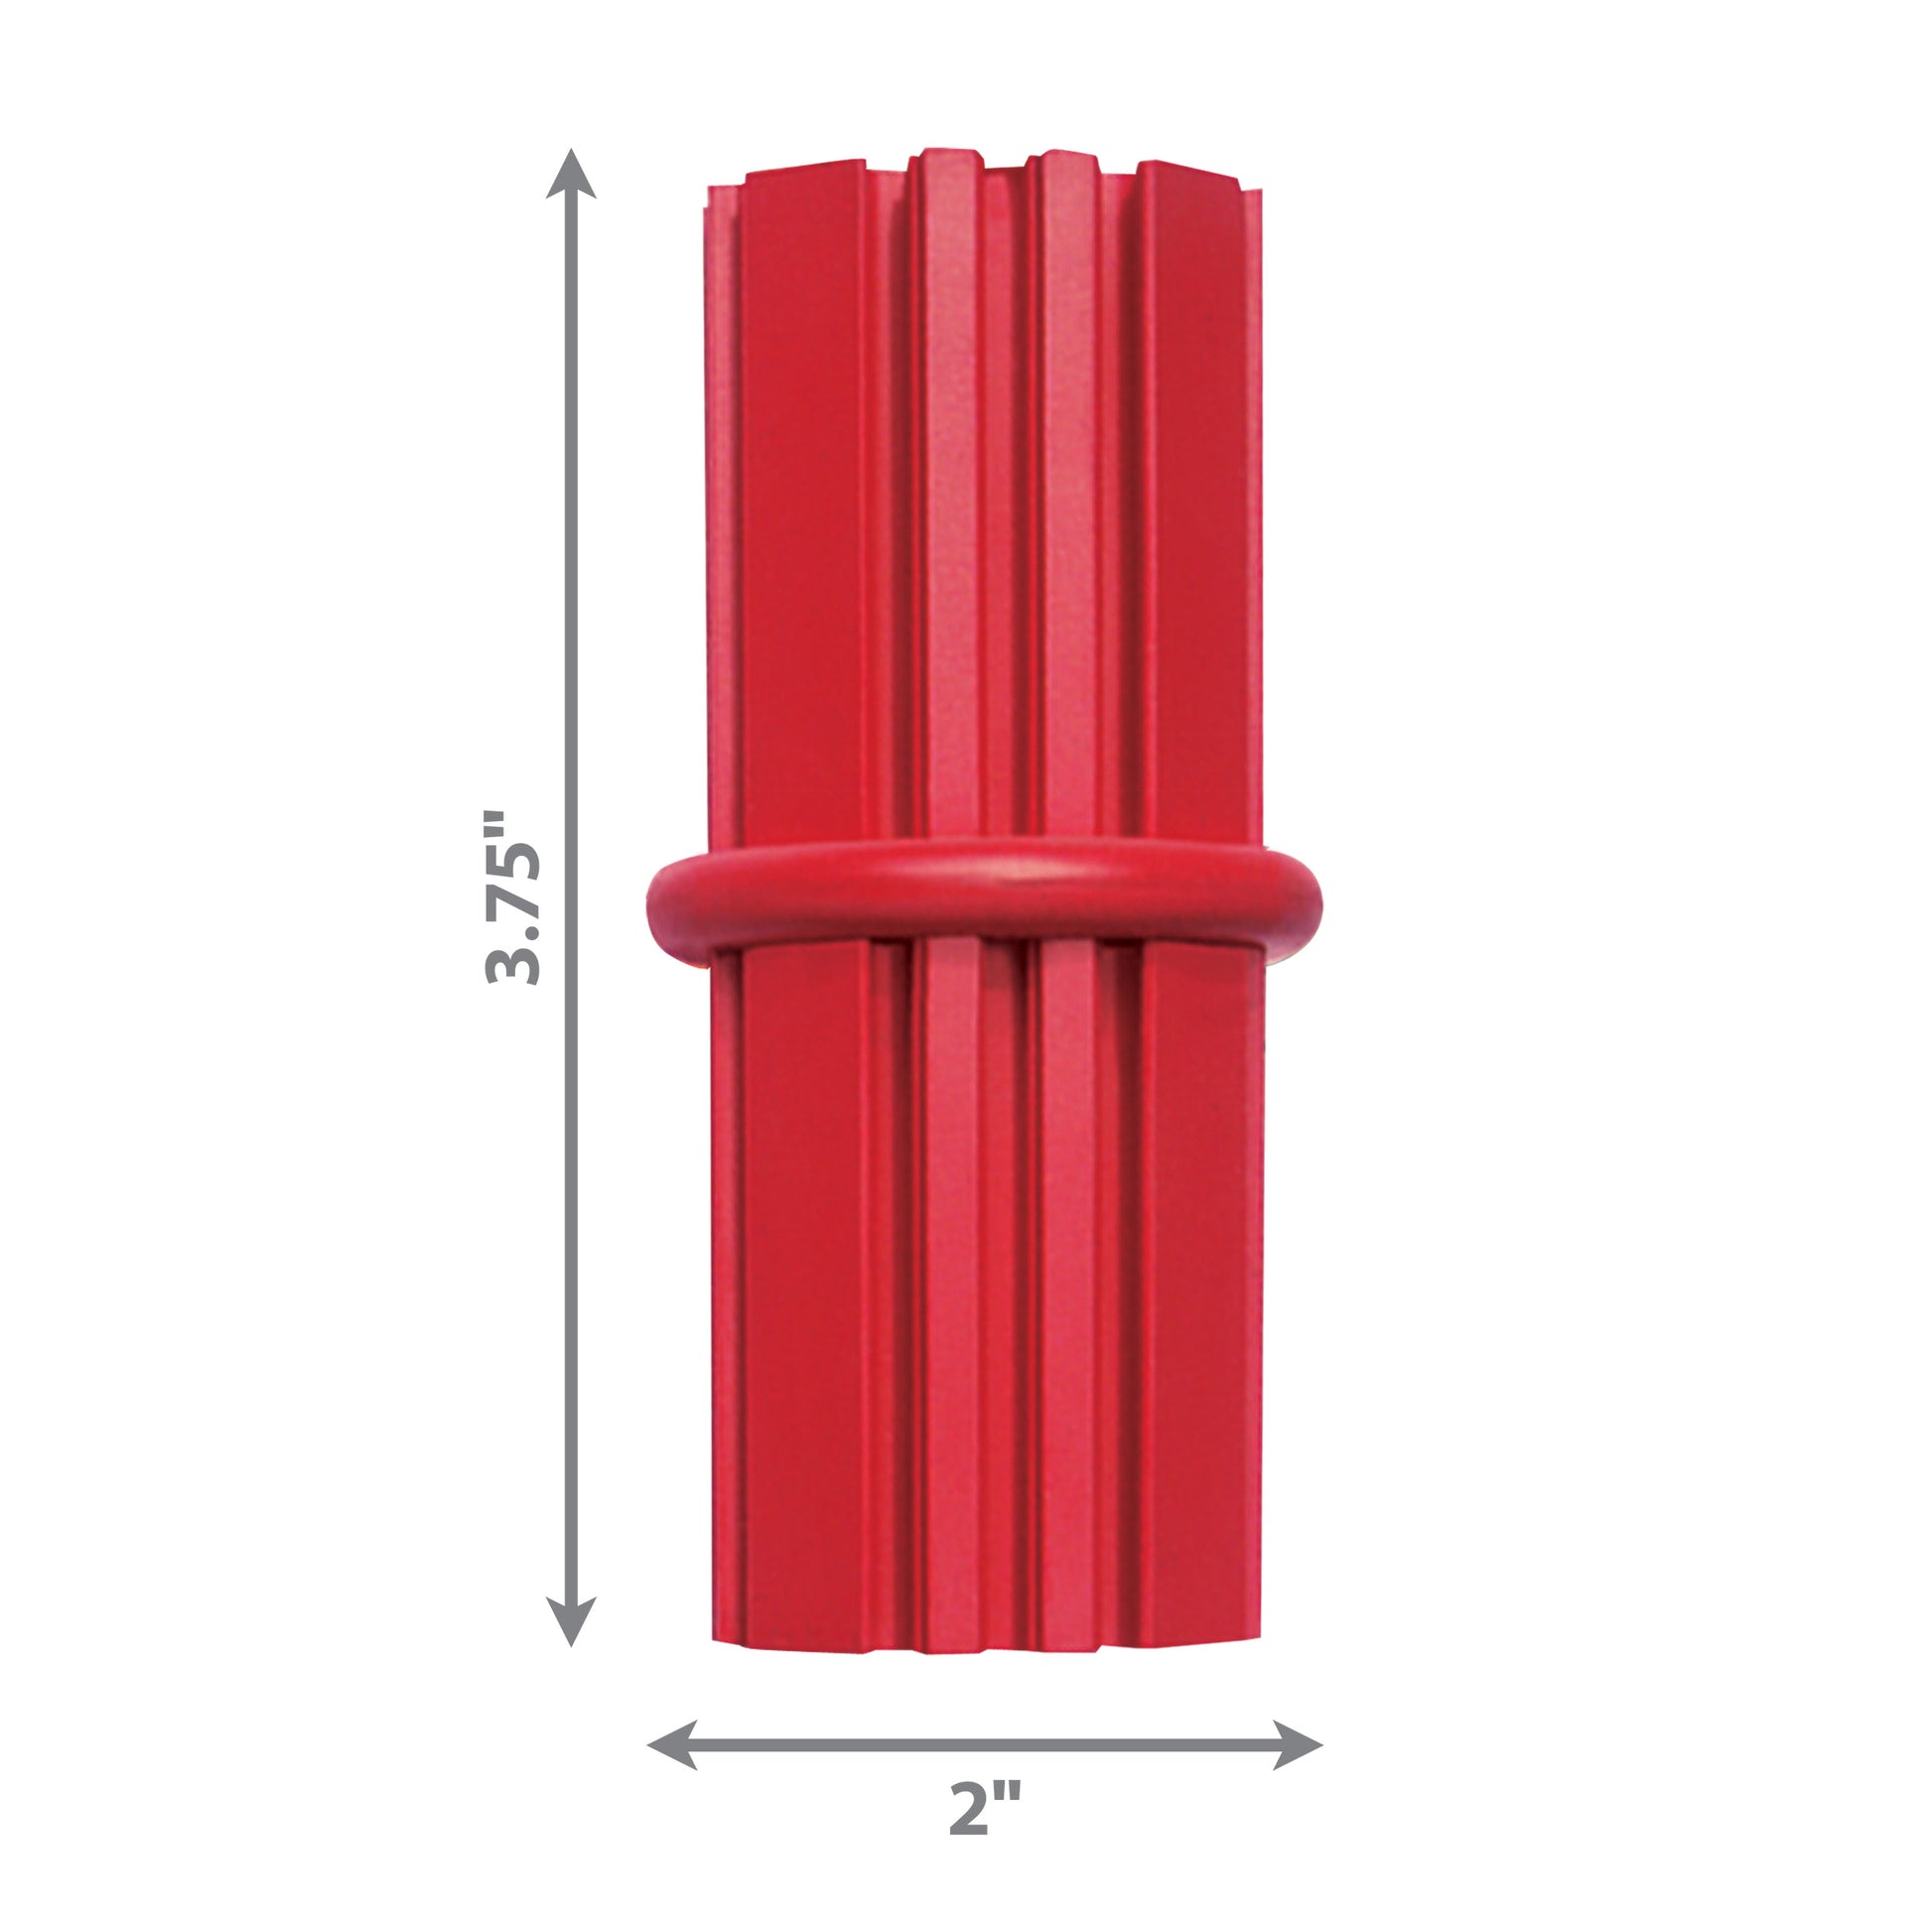 An image of the SALE: KONG Dental Stick by Your Whole Dog, a red plastic tube with measurements, designed for dental care for teeth and gums.